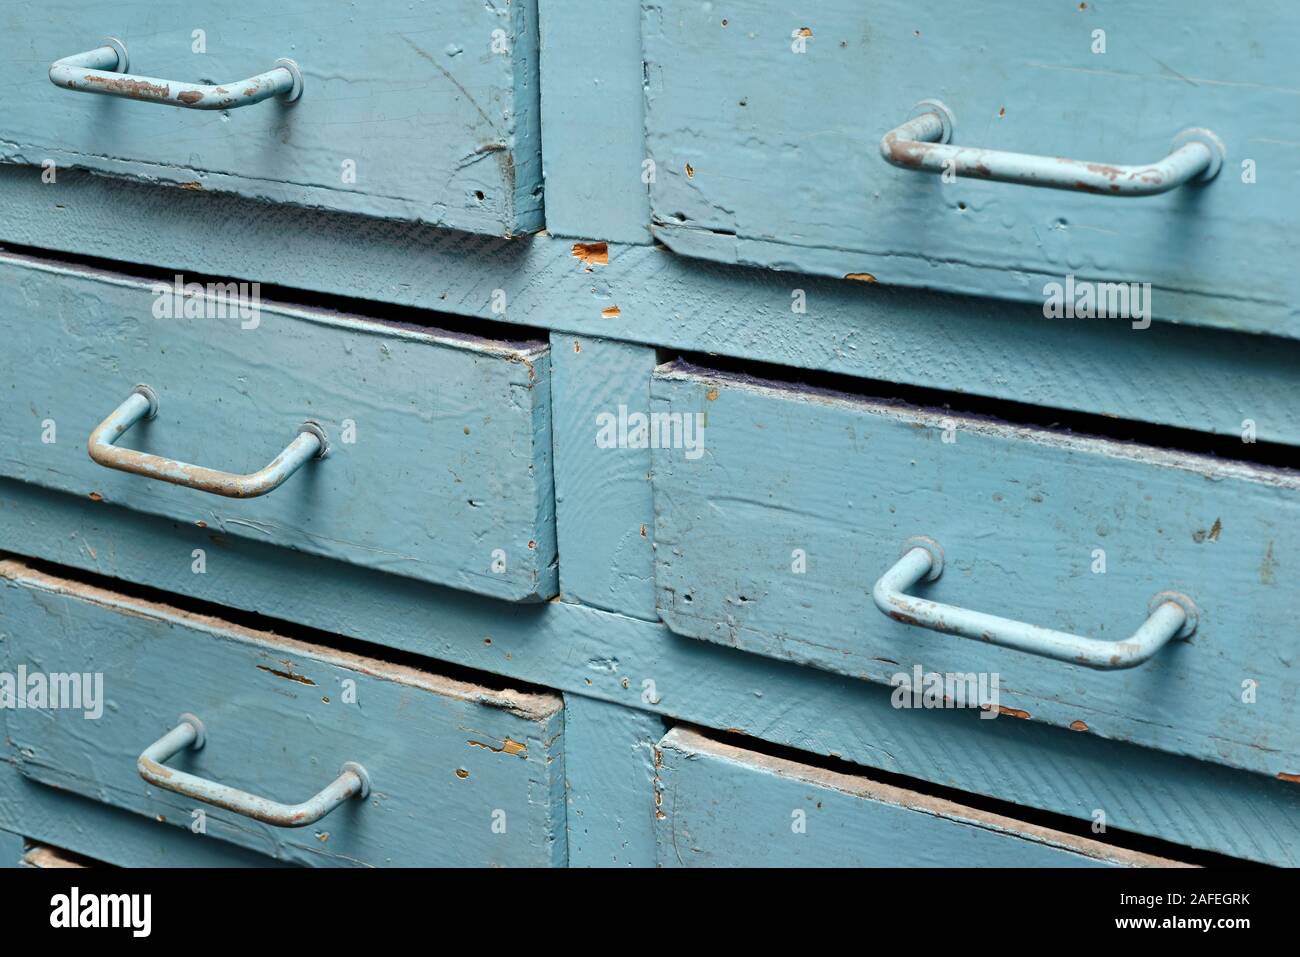 Backgrounds and textures: old blue wooden closet with drawers, close-up shot Stock Photo